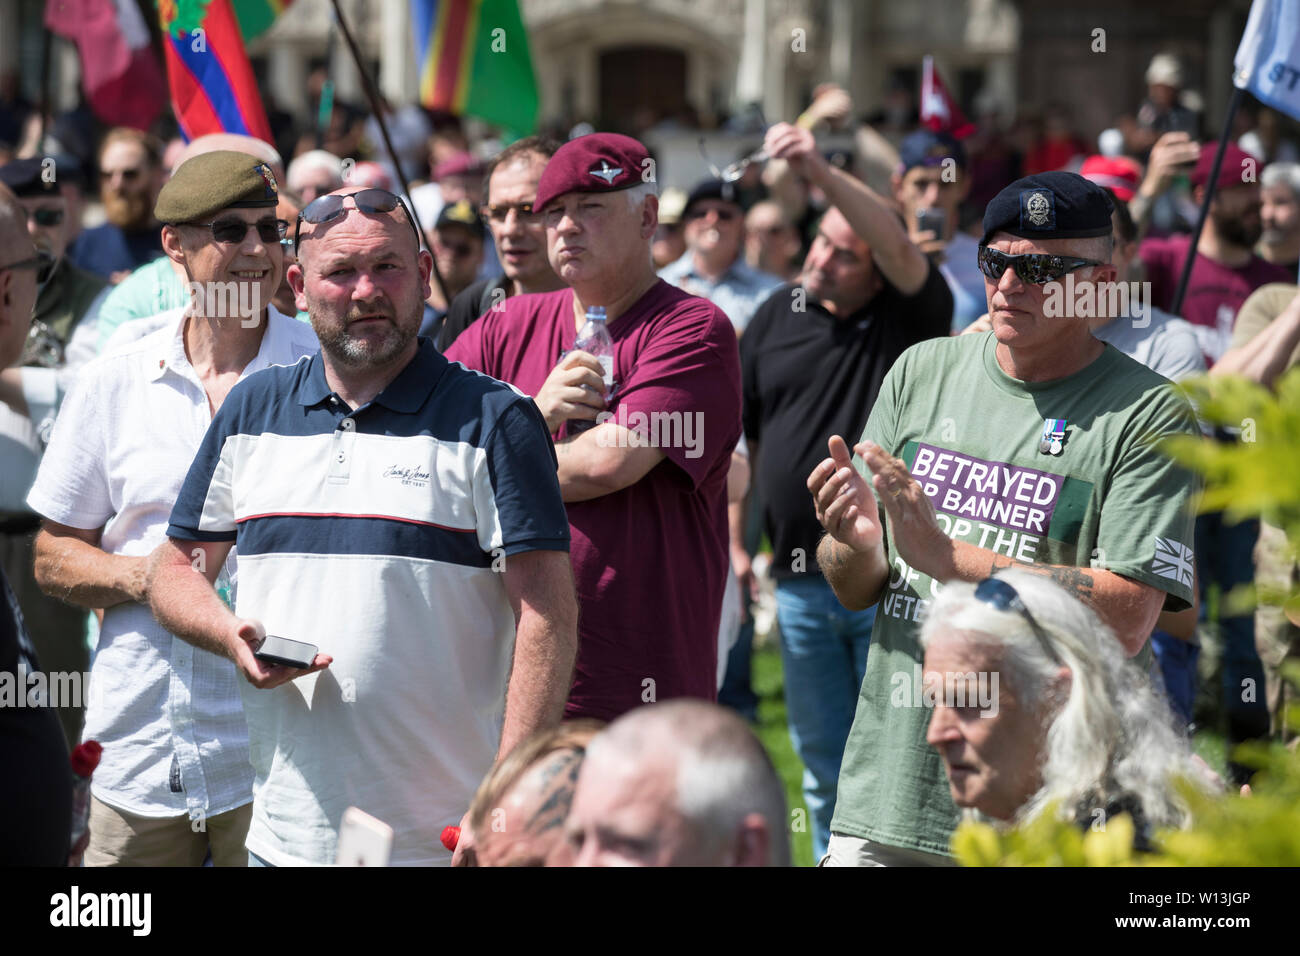 Former Paras protest in London as  former British soldier faces murder charges over 1972 shootings on Bloody Sunday, Londonderry, Northern Ireland Stock Photo